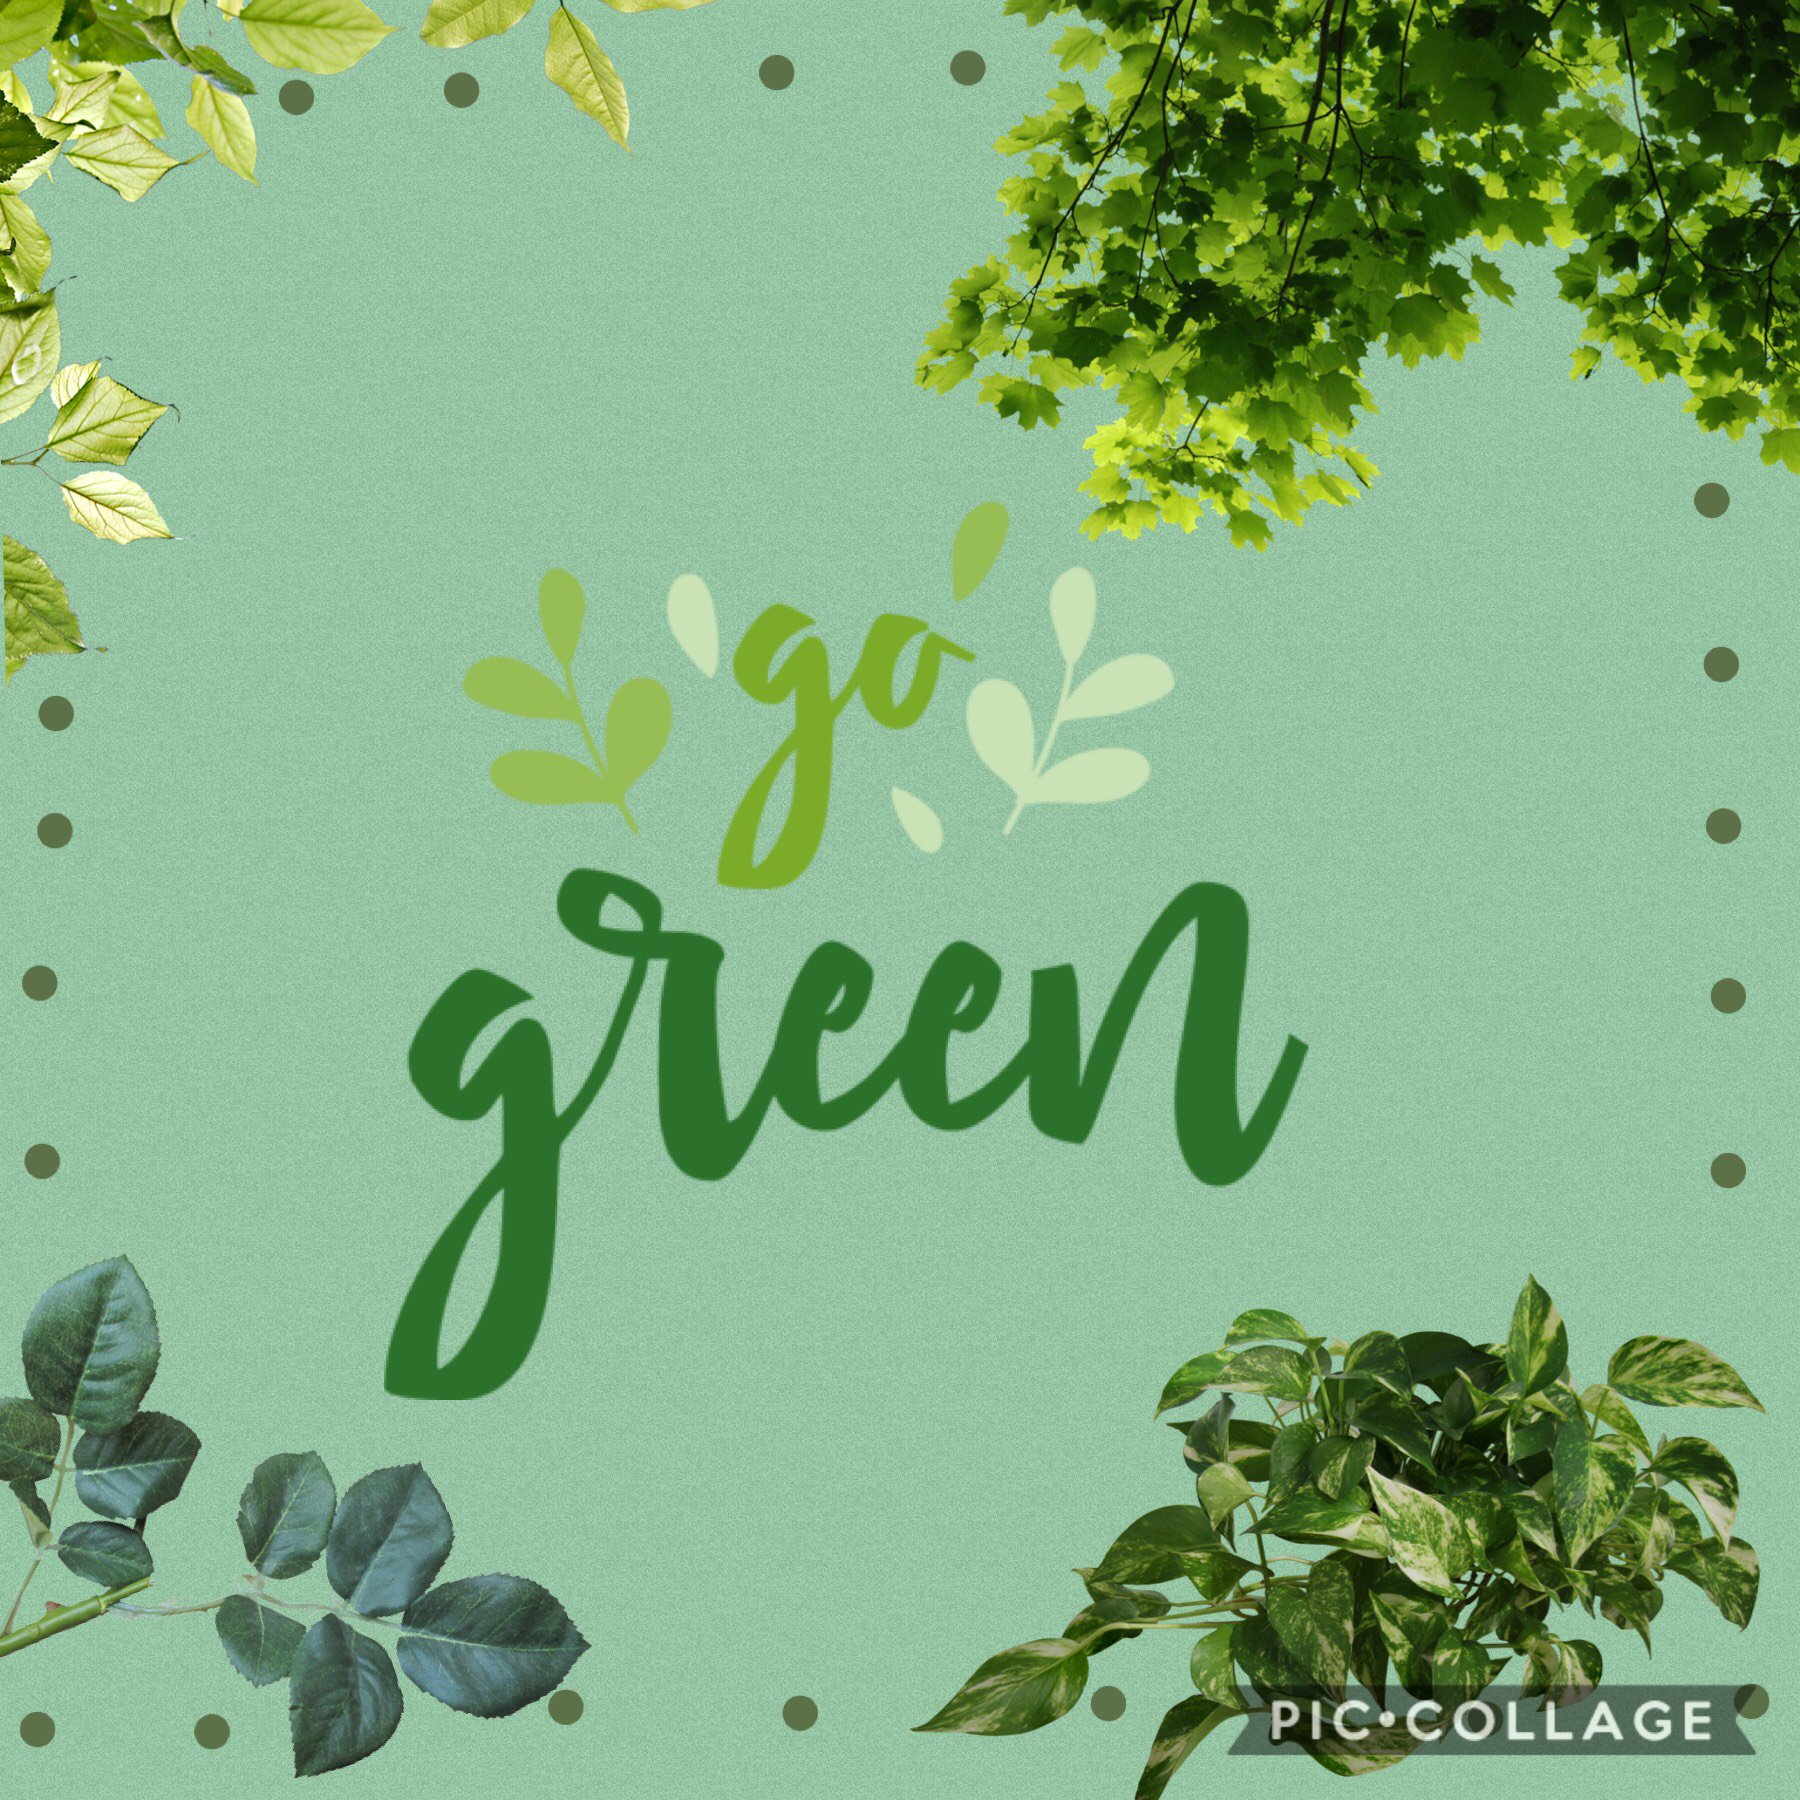 Hey everyone! I strongly believe that we should all help keep our Earth clean and safe for all. Here is my #savetheearth PicCollage! 💚🌱🌳